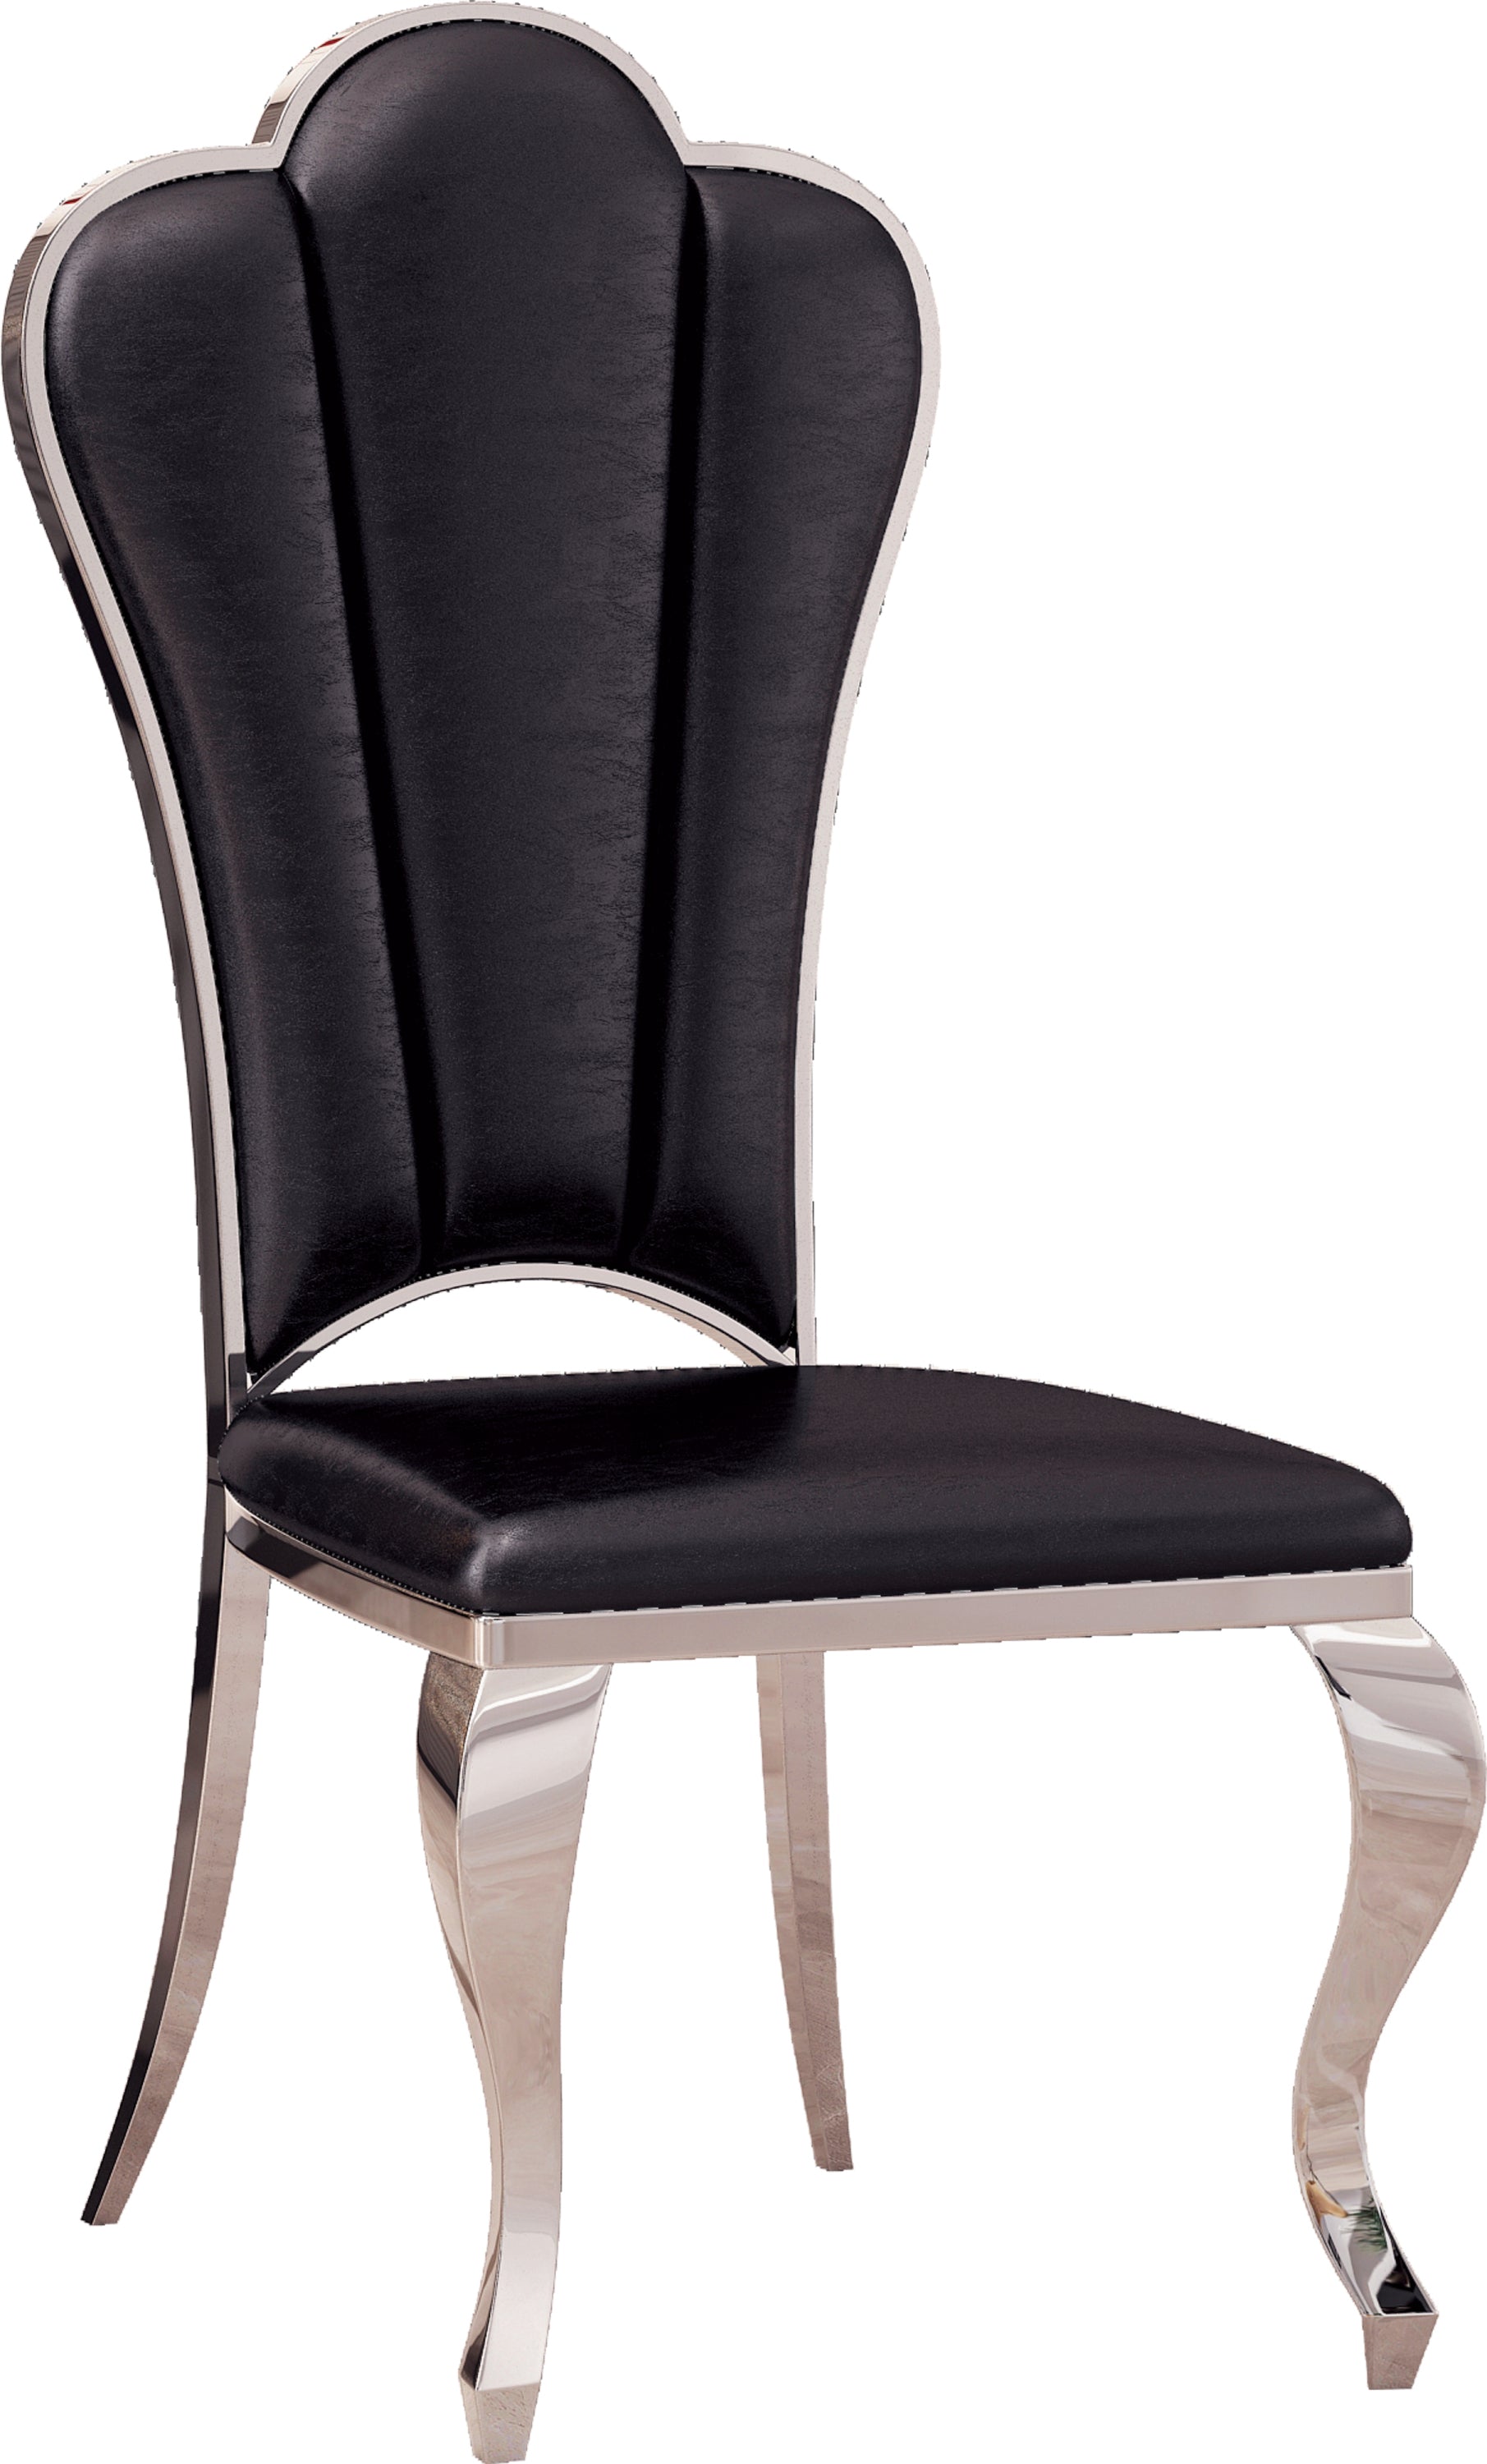 Modern Leatherette Dining Chairs with Stripe Armless Chair (Set of 2) - Black